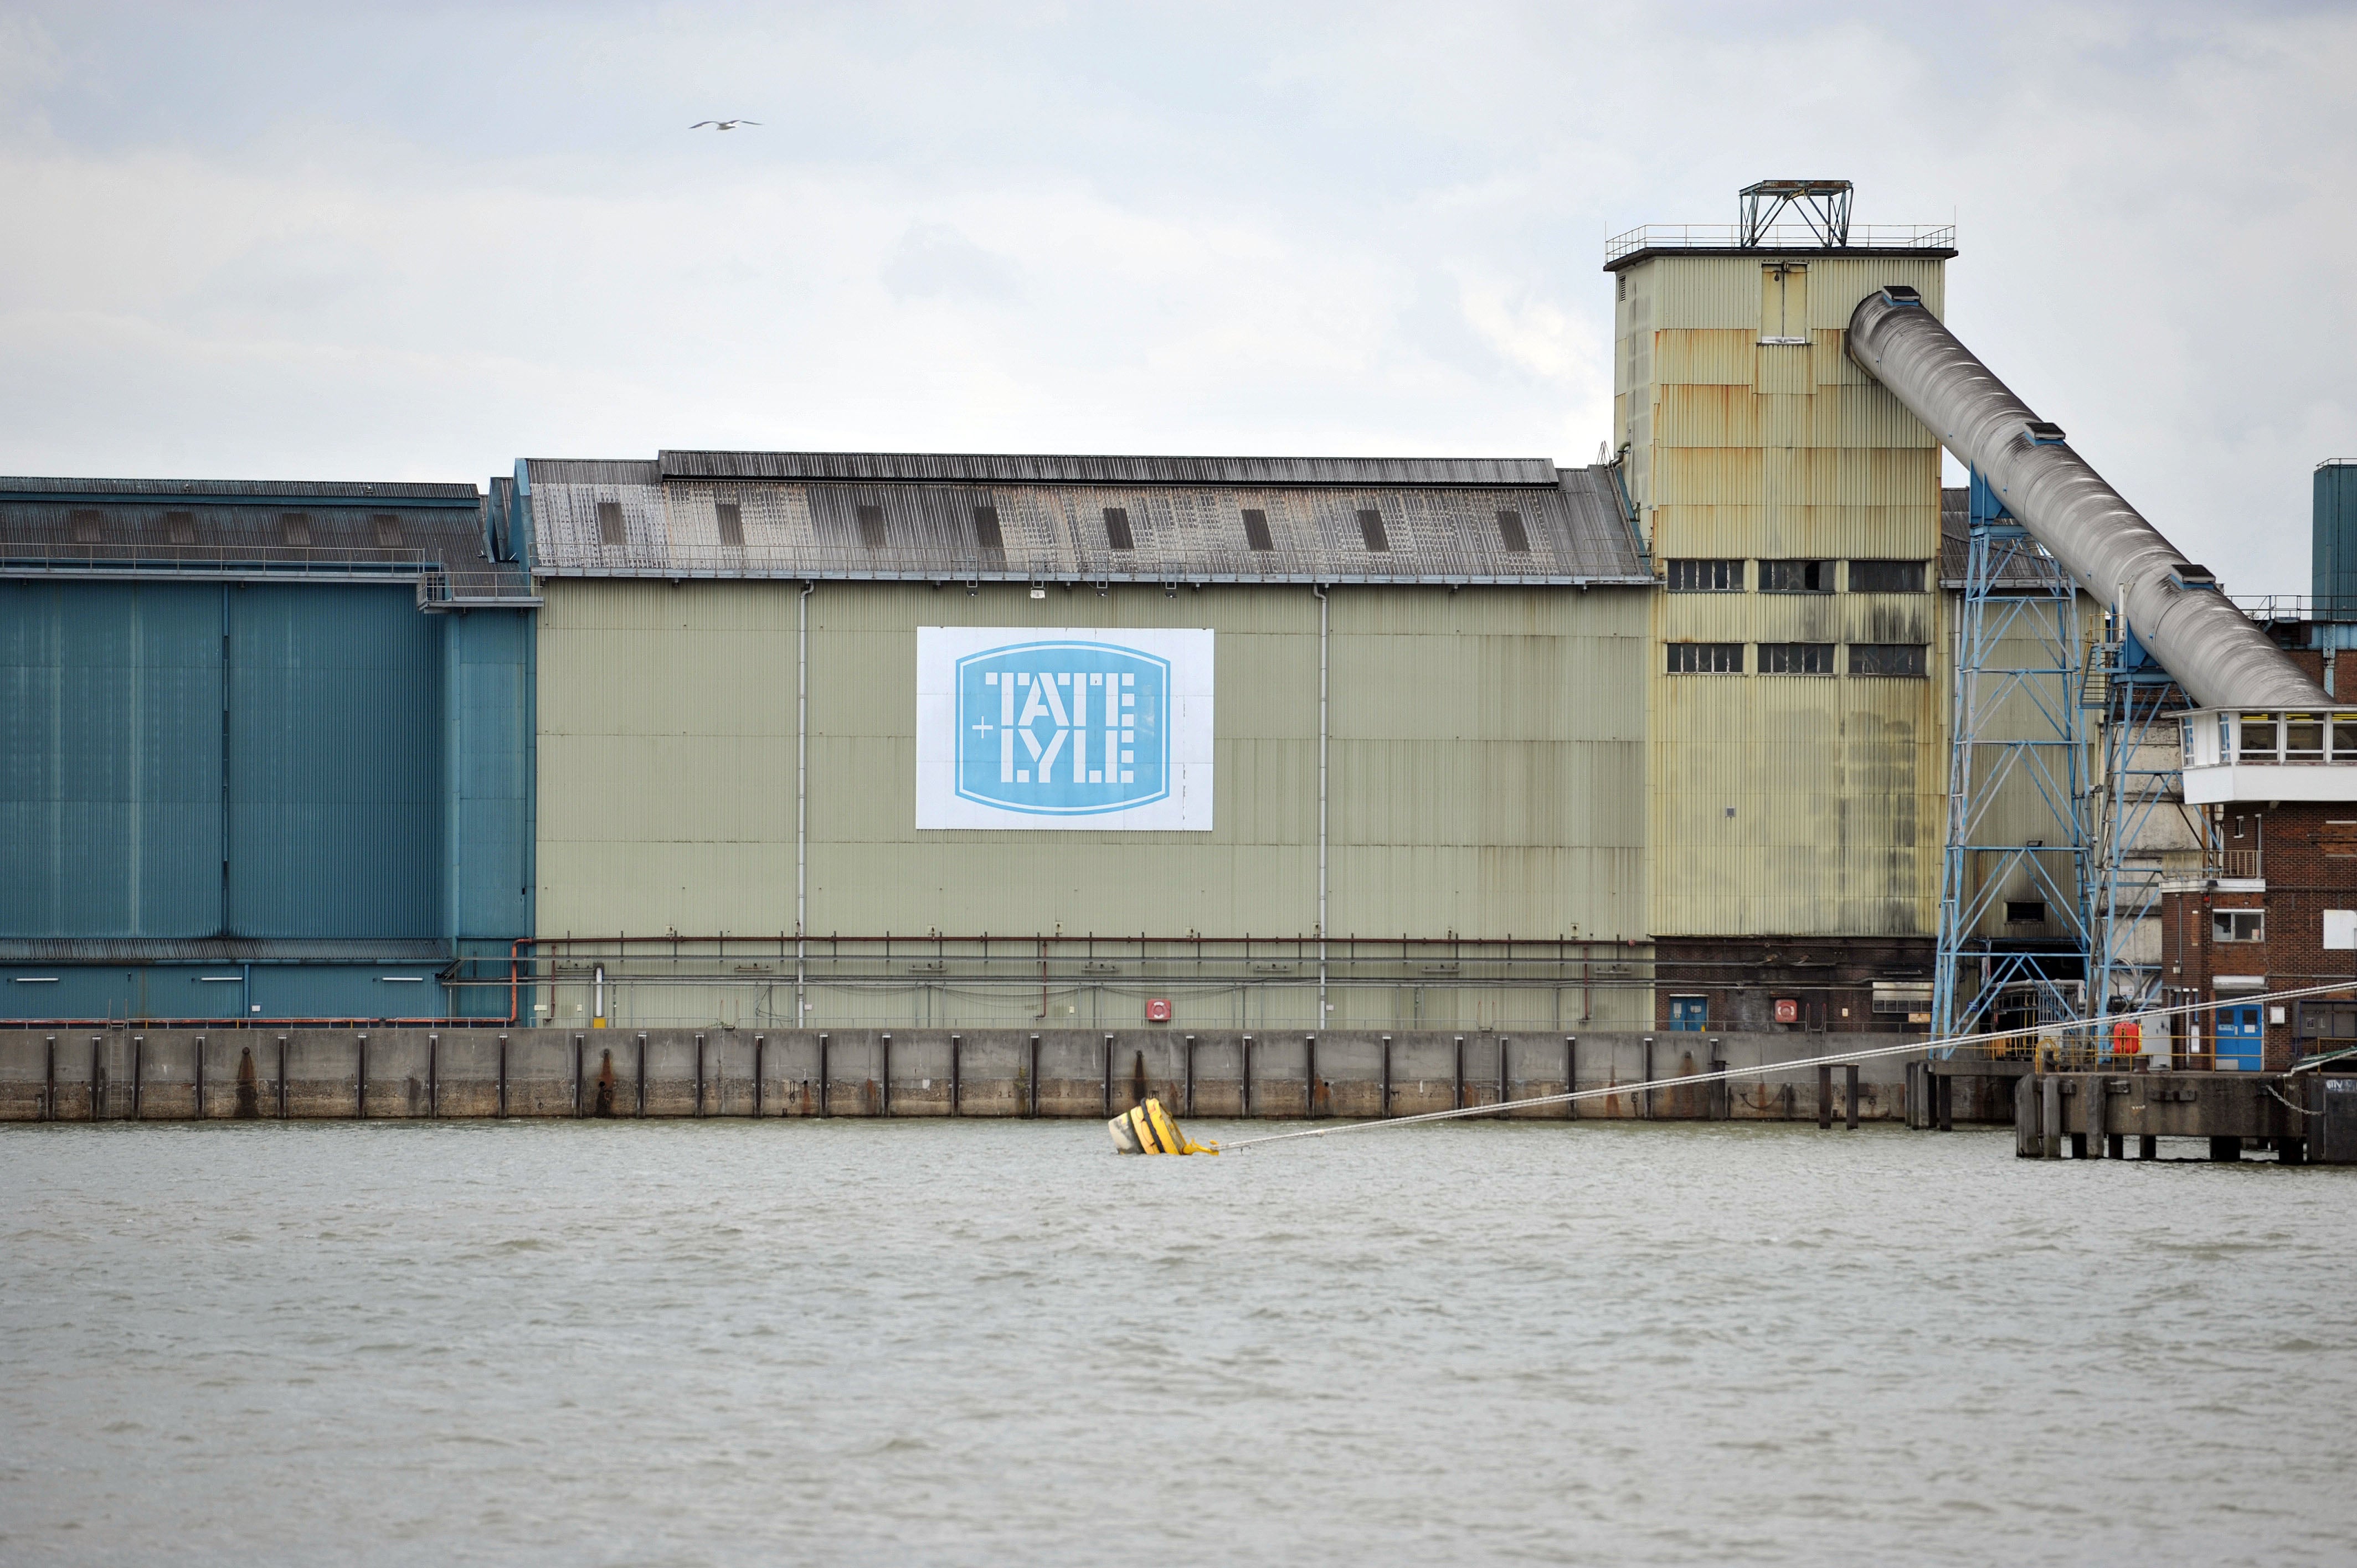 The Tate and Lyle sugar factory in Silvertown, east London